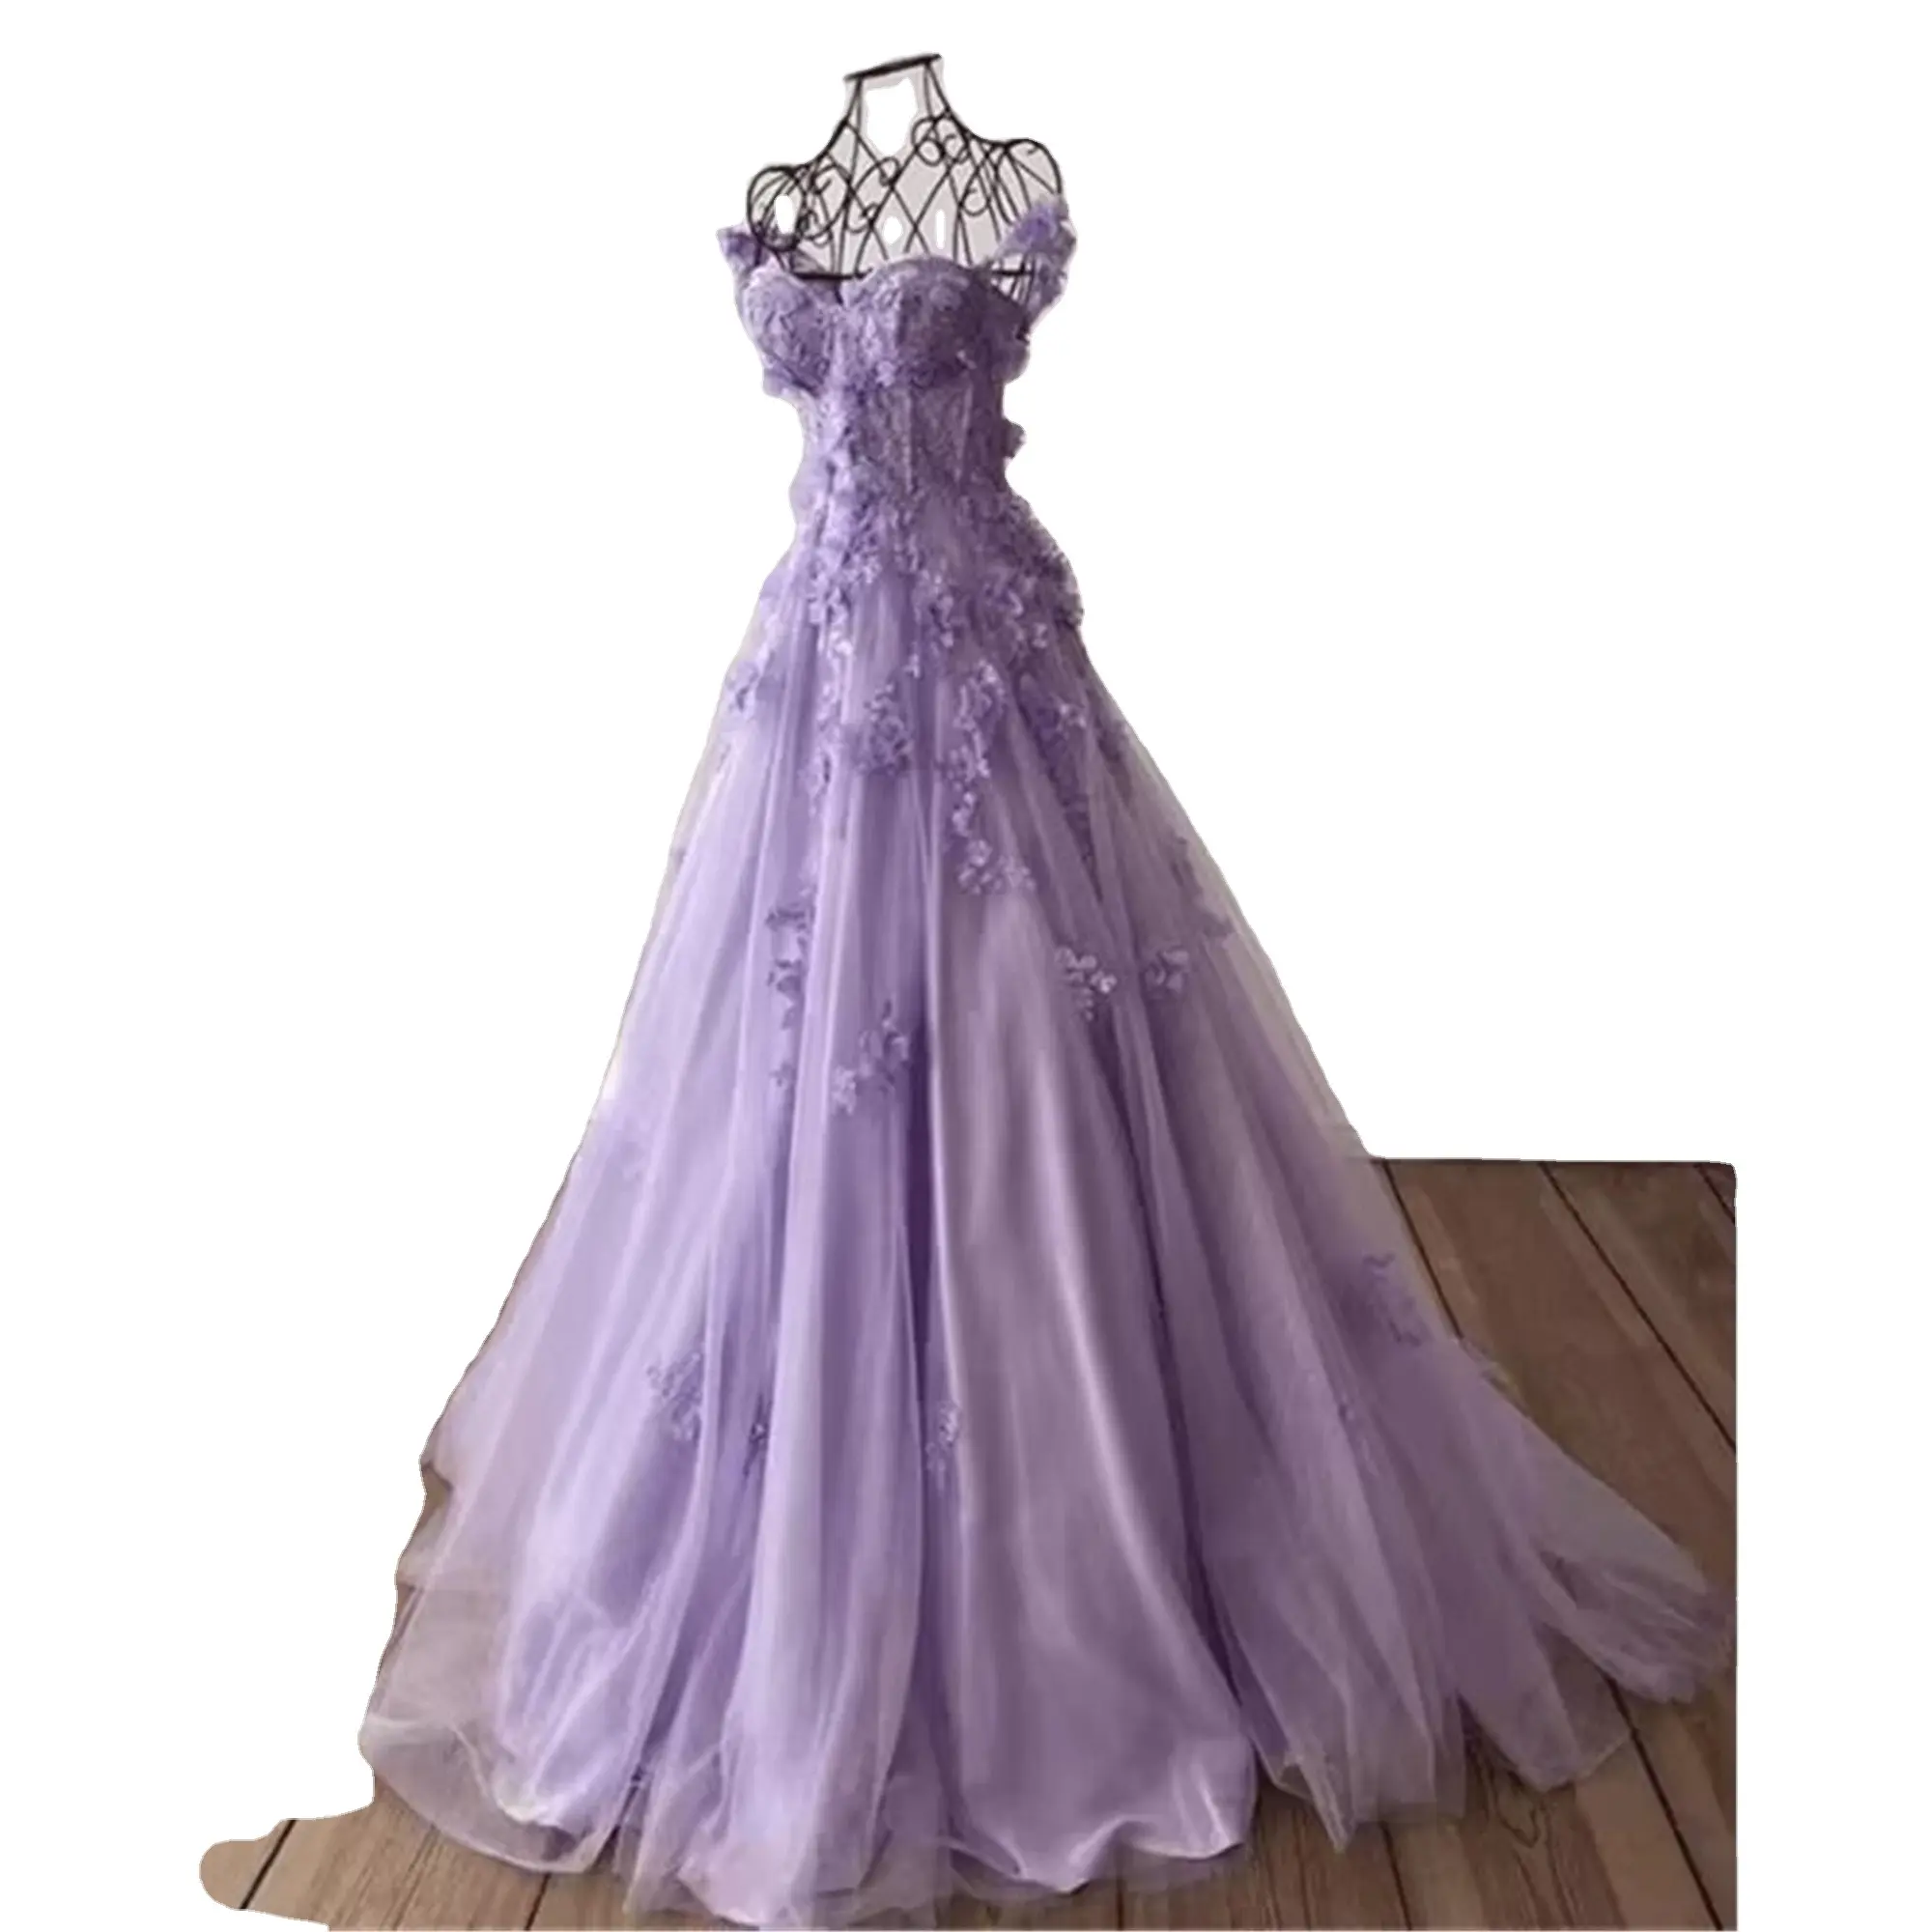 Elegant Bohemian Purple 3D Applique Lace Wedding Dress A-line Shiny Tulle Sleeveless Beach Evening Party Gown for Women 2023